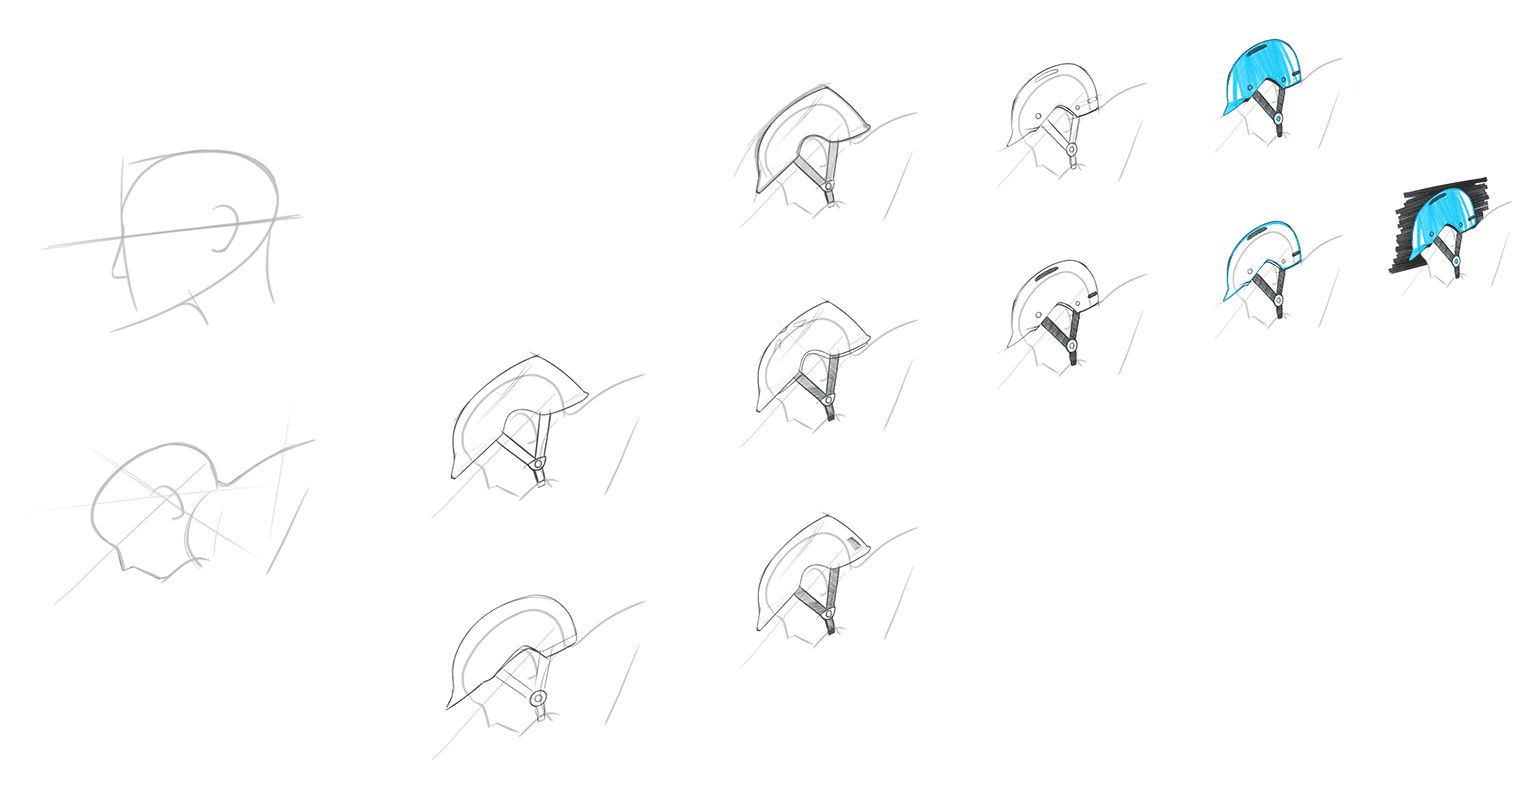 Industrial designers sketches depicting the design development process for a bike helmet executed in the Forge app